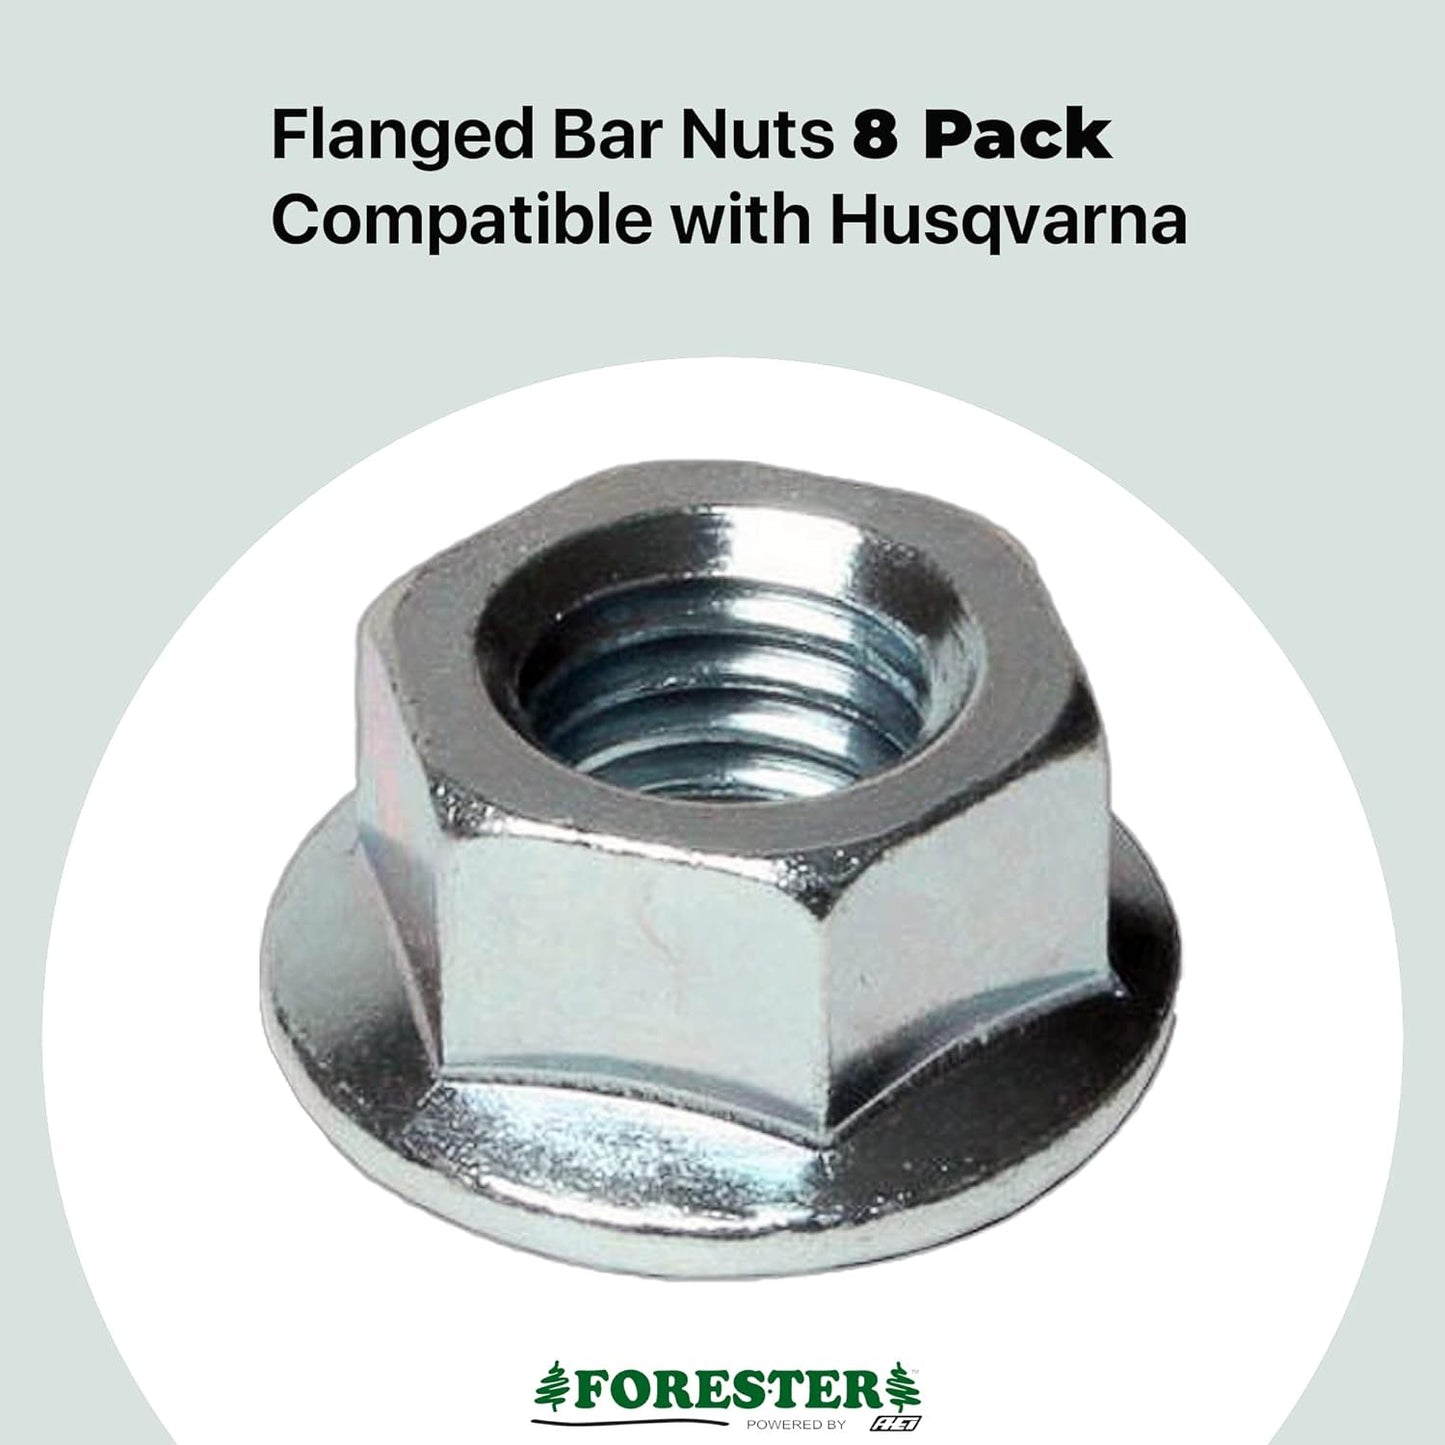 Forester Replacement Chainsaw Bar Nut for Husqvarna Chainsaws